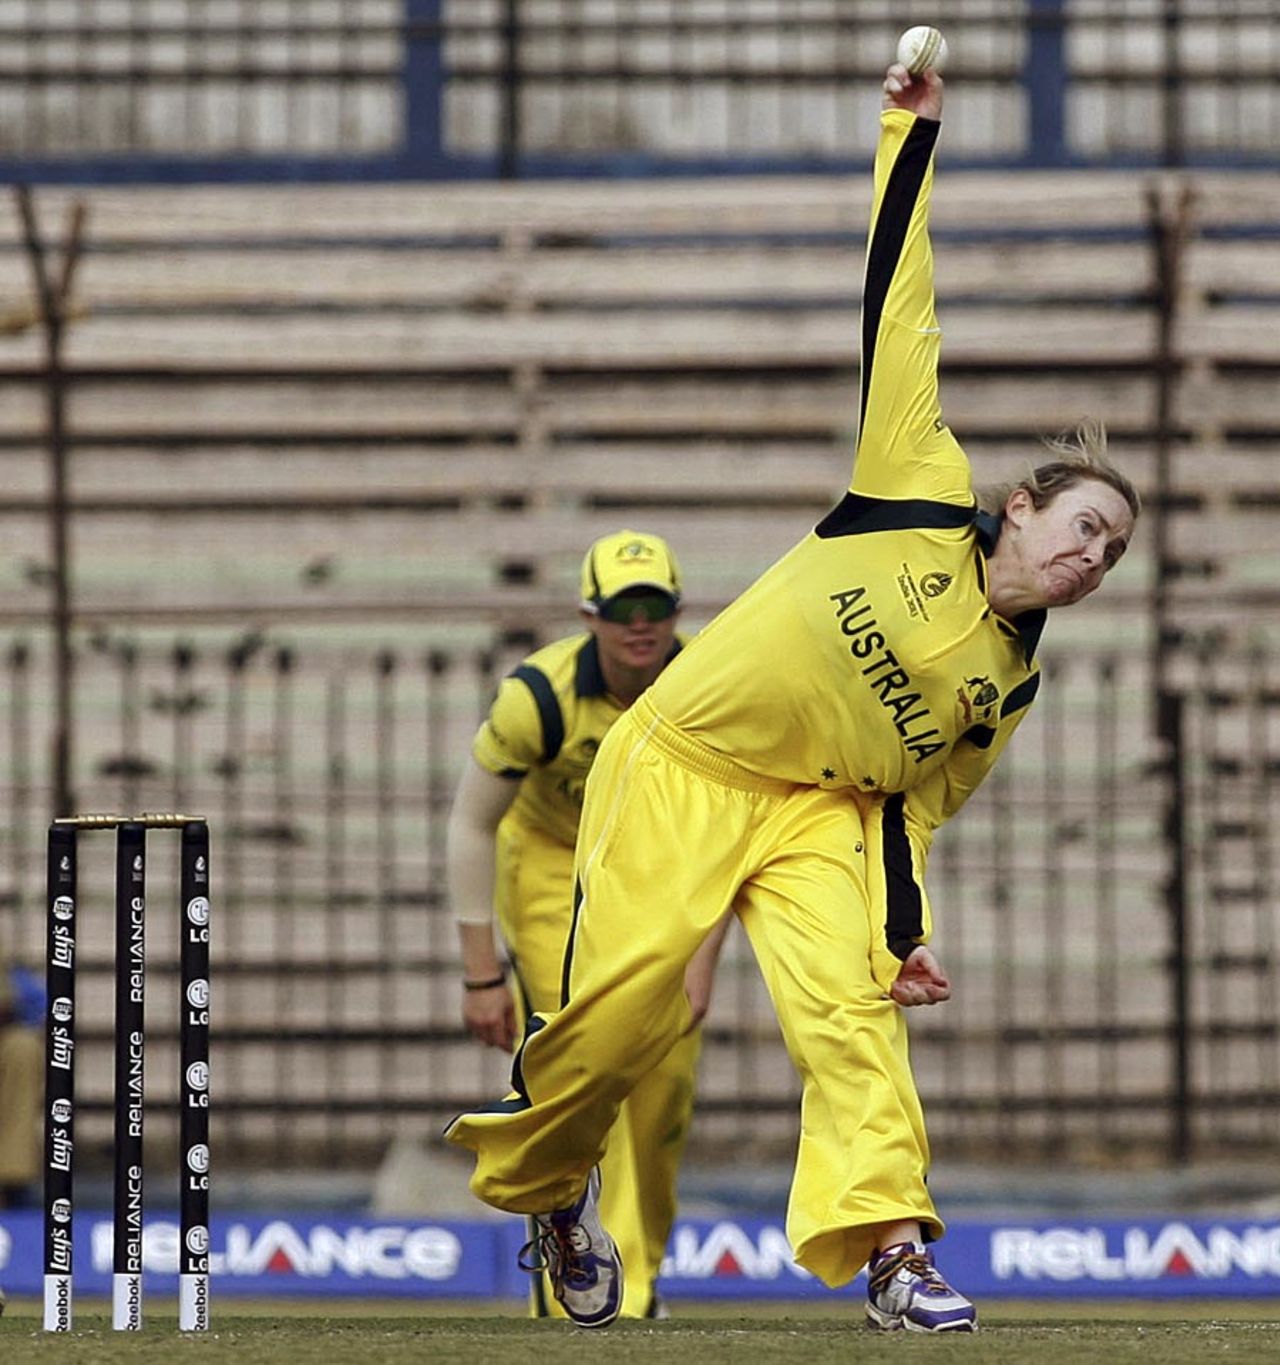 Sarah Coyte was Australia's most productive bowler, with 3 for 20 off her ten overs, Australia v Pakistan, Women's World Cup 2013, Group B, Cuttack, February 1, 2013